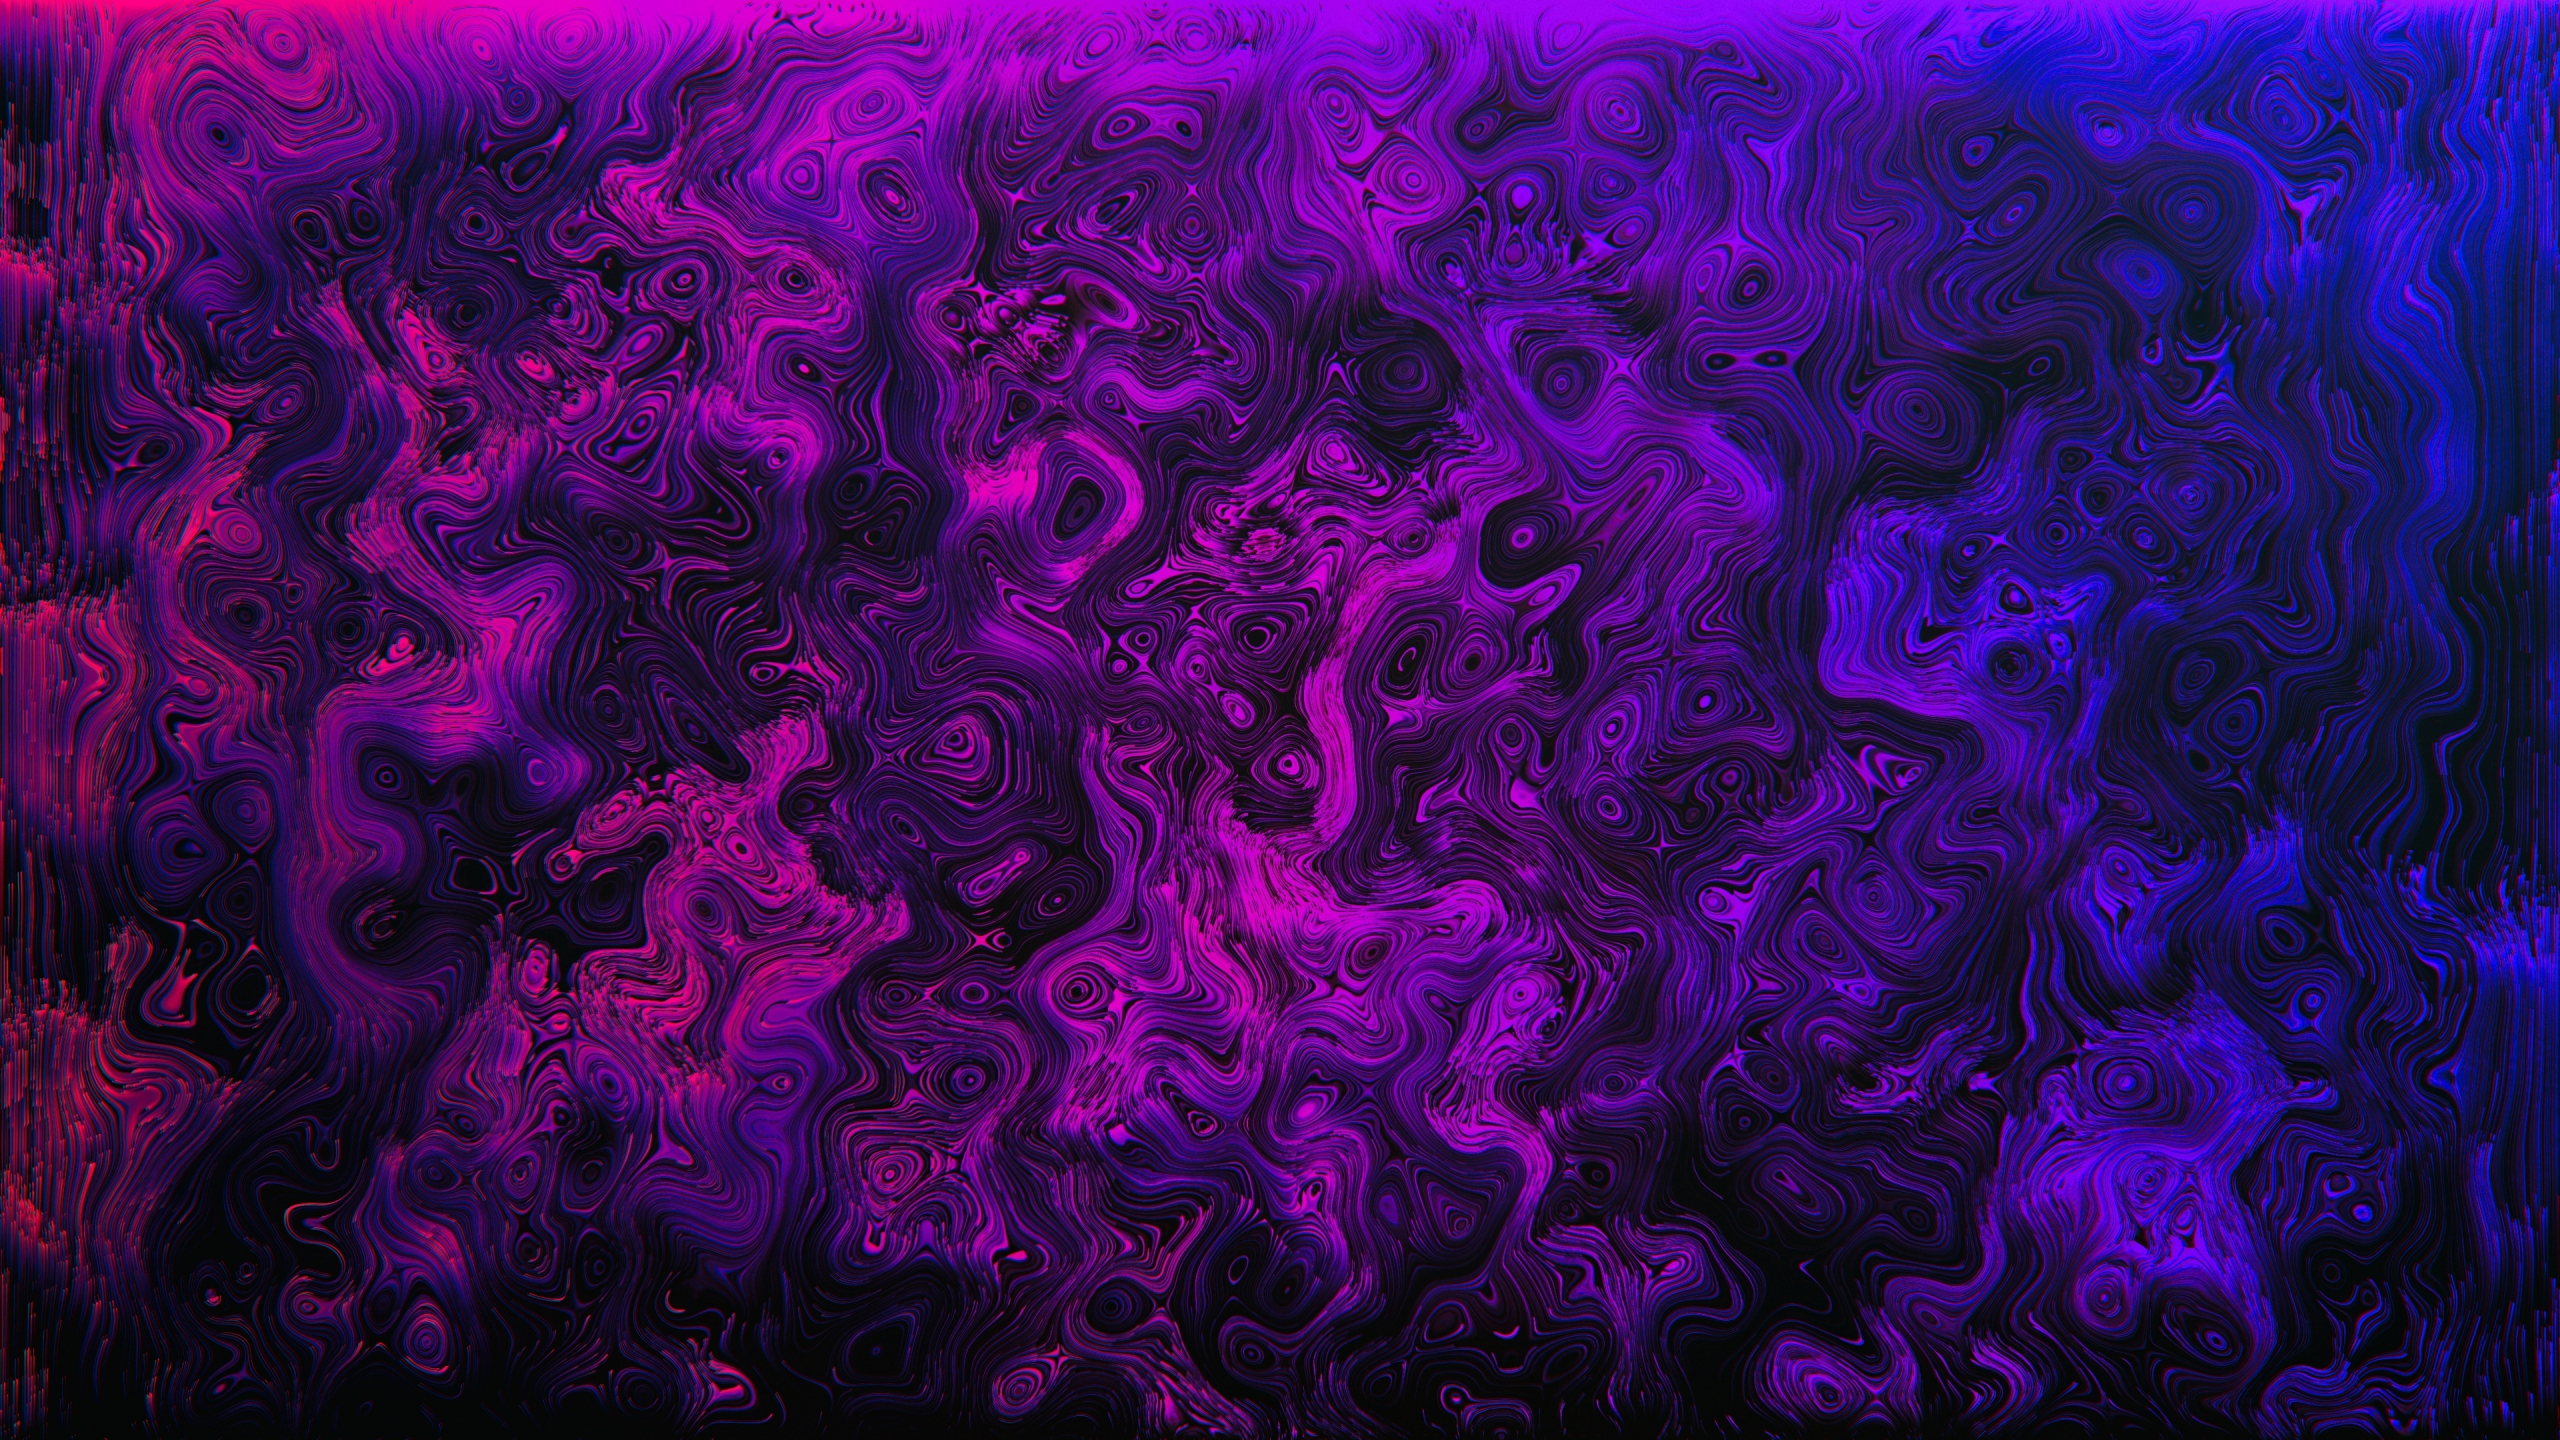 Download pink and purple, texture, abstract 2560x1440 wallpaper, dual wide 16:9 2560x1440 hd